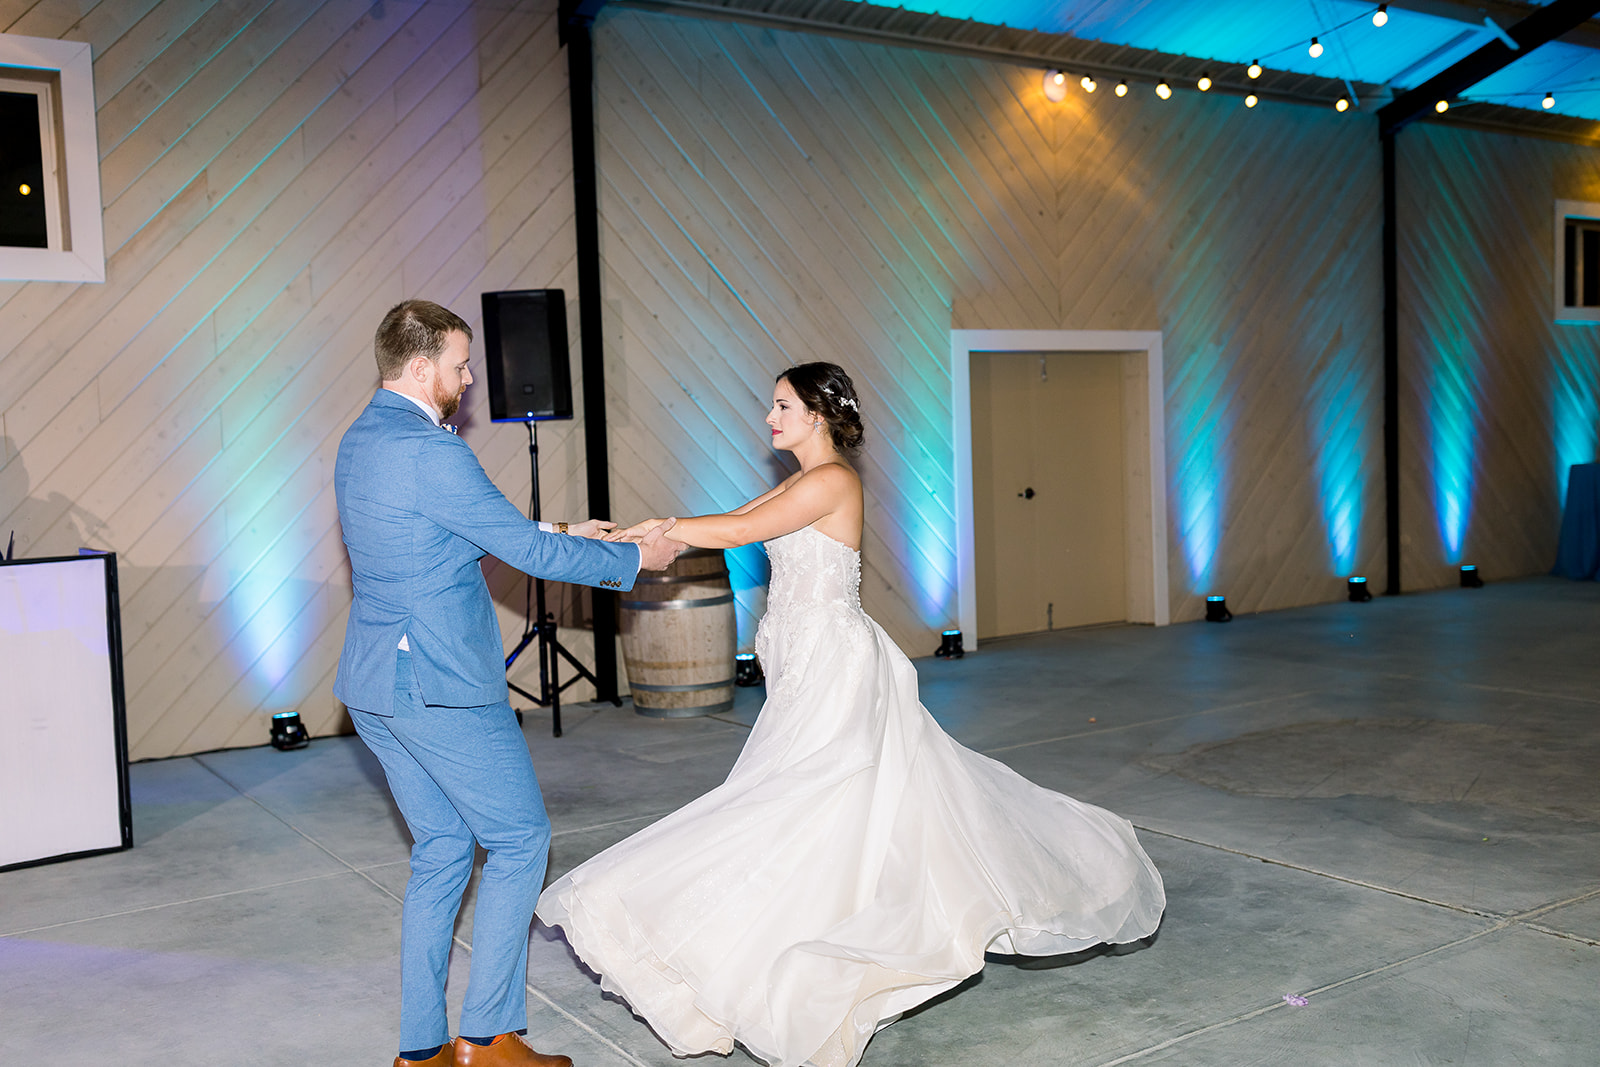 Bride's creamy train swirls as she joyfully dances with her groom at Willow and Oak.